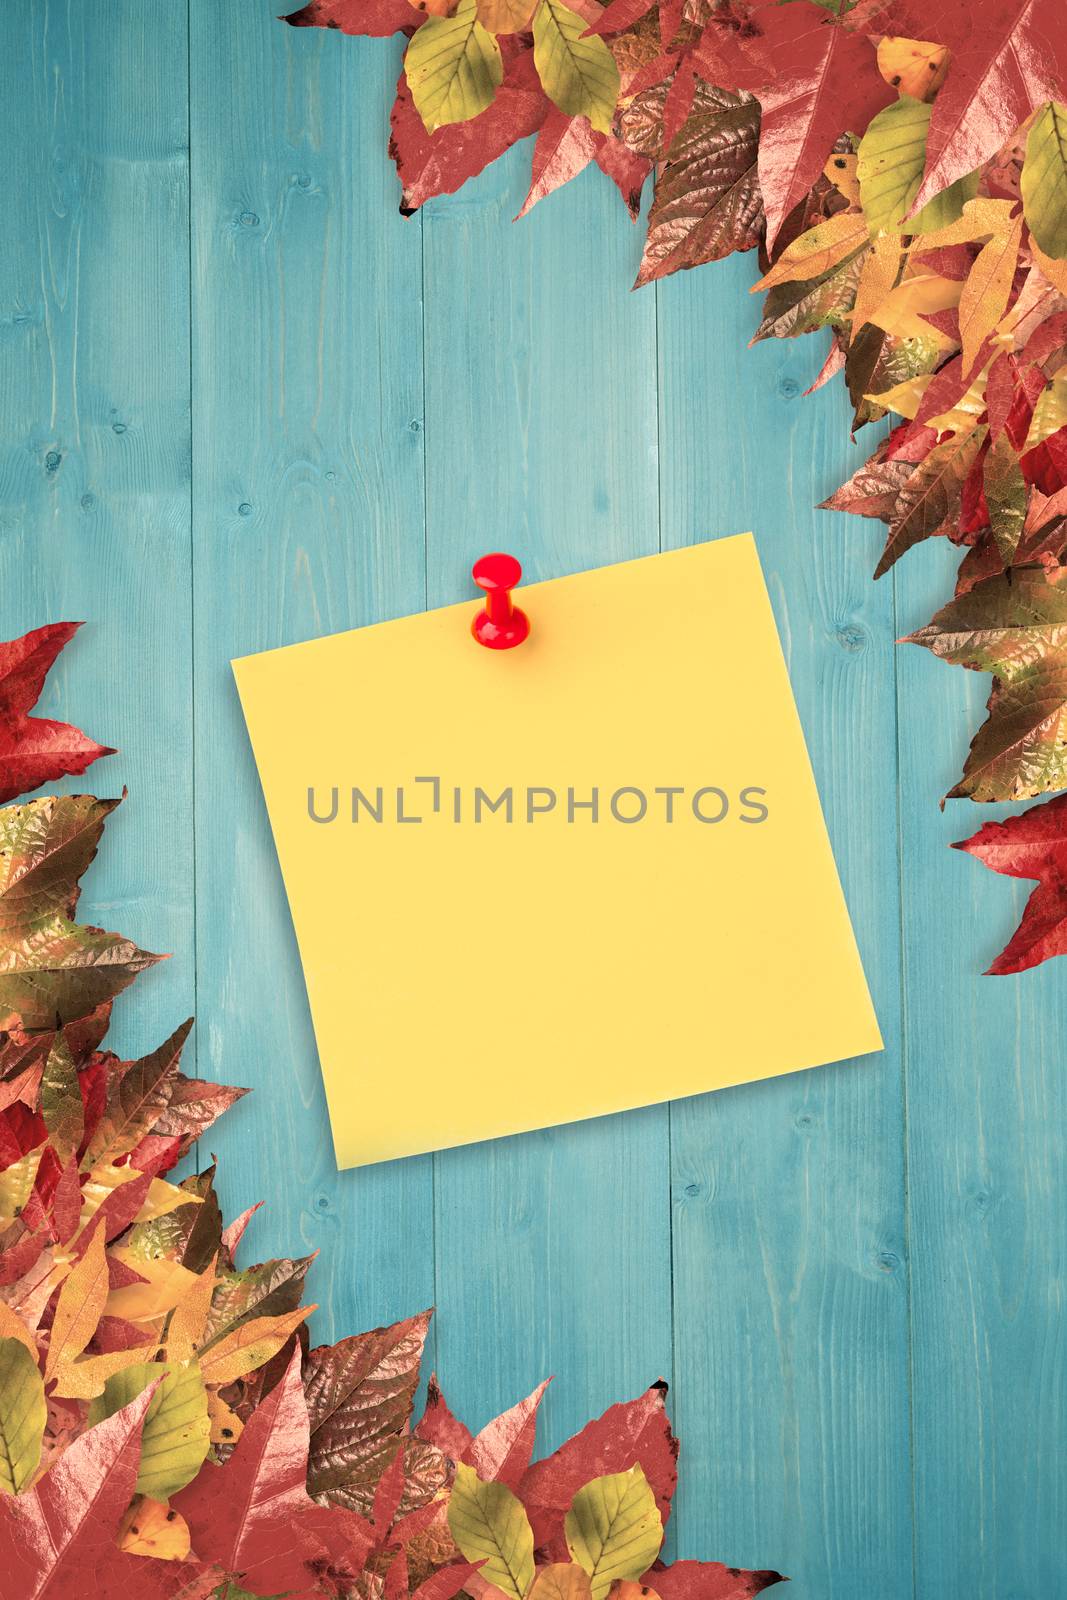 Illustrative image of pushpin on yellow paper  against autumn leaves pattern